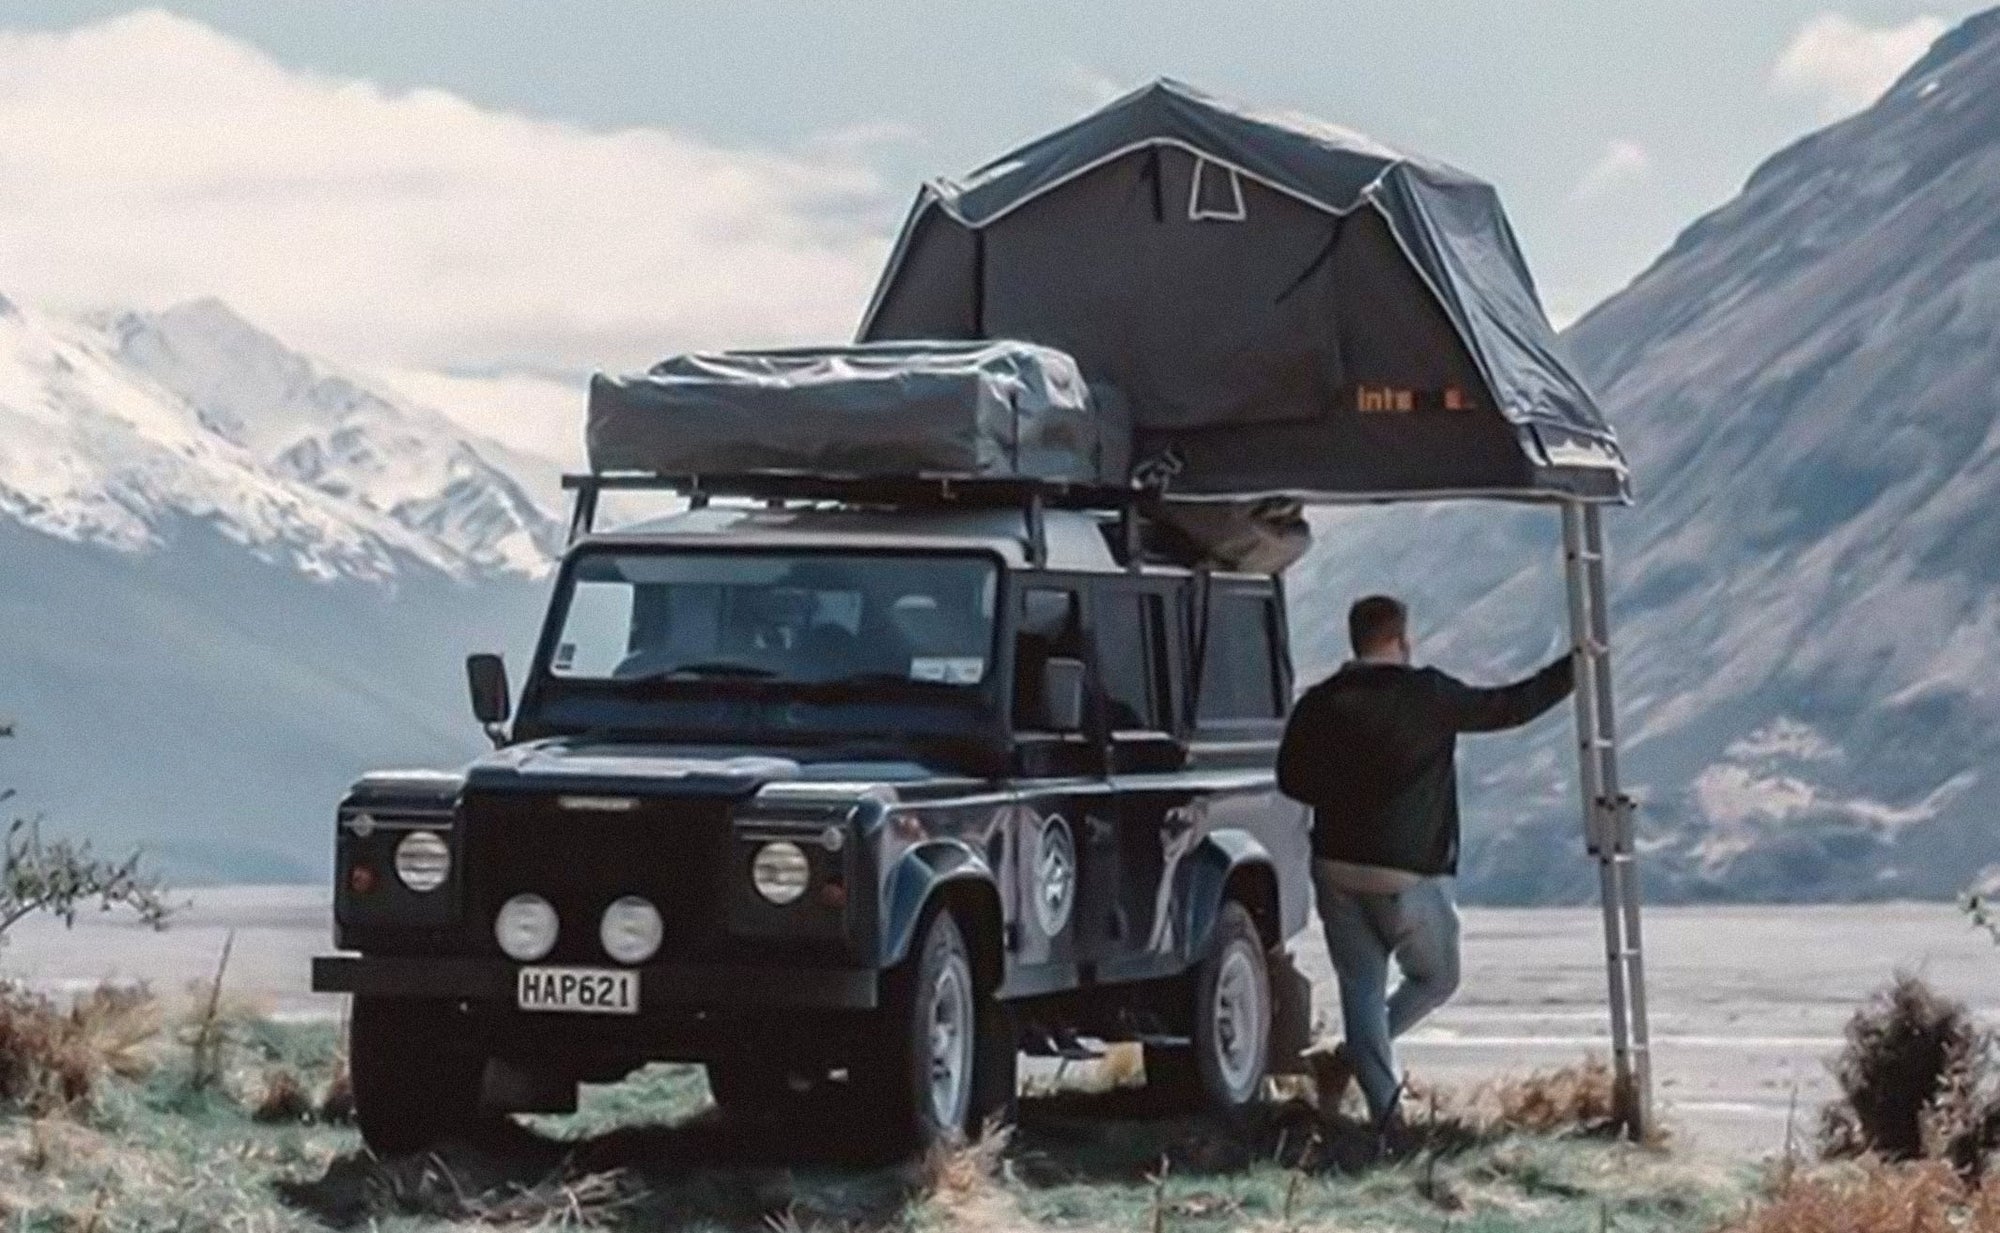 The Guide to Overlanding: Adventure, Gear, and Essentials